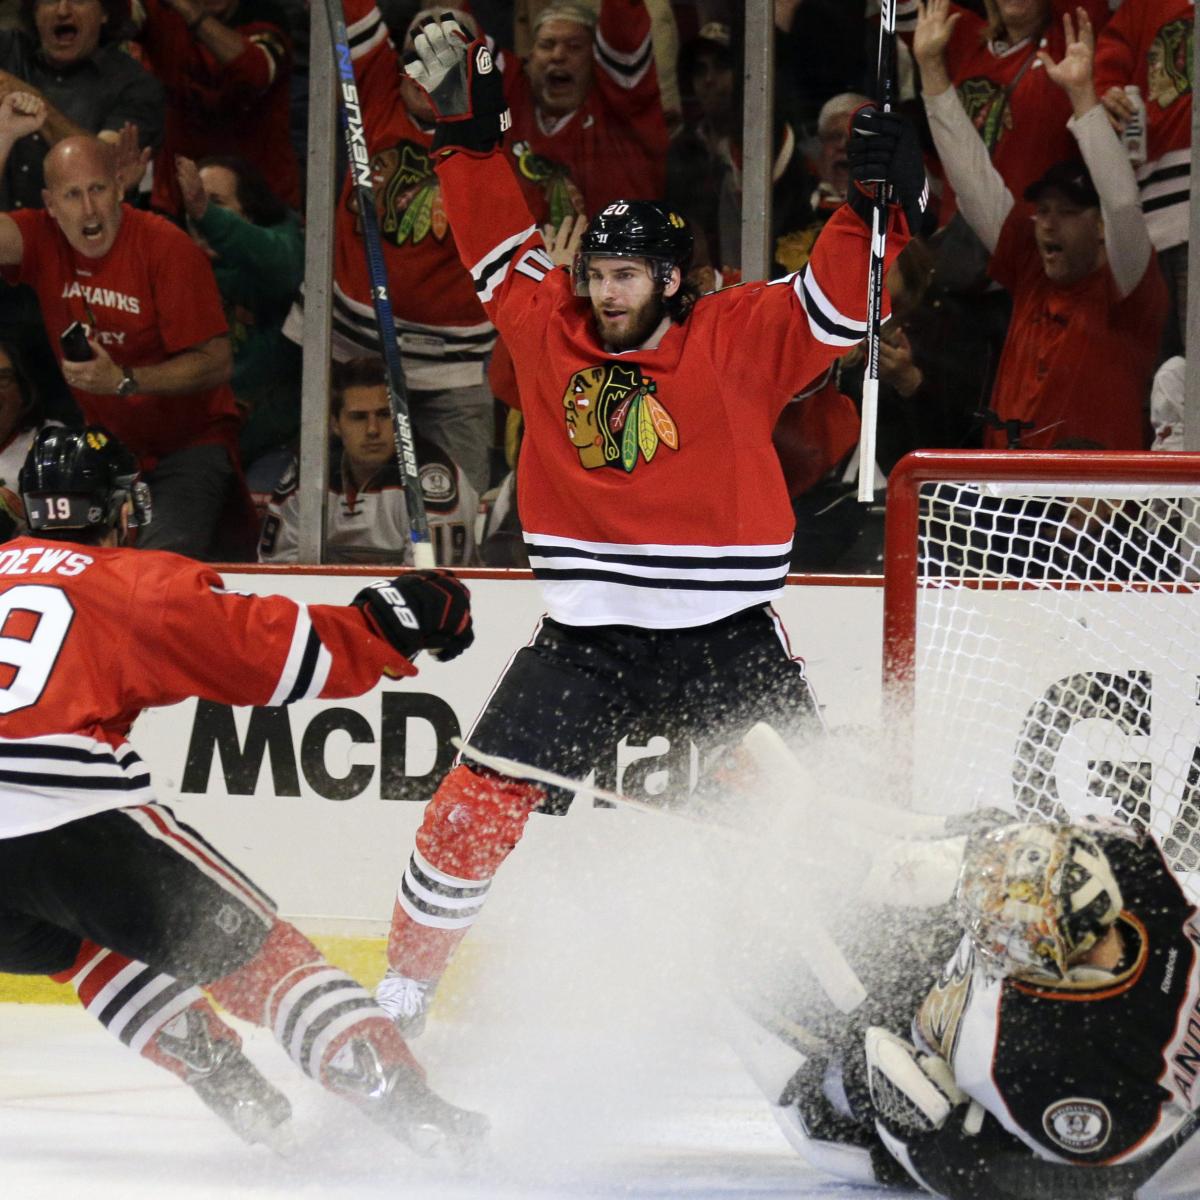 Ducks vs. Blackhawks Game 6 Takeaways and What They Mean for Game 7